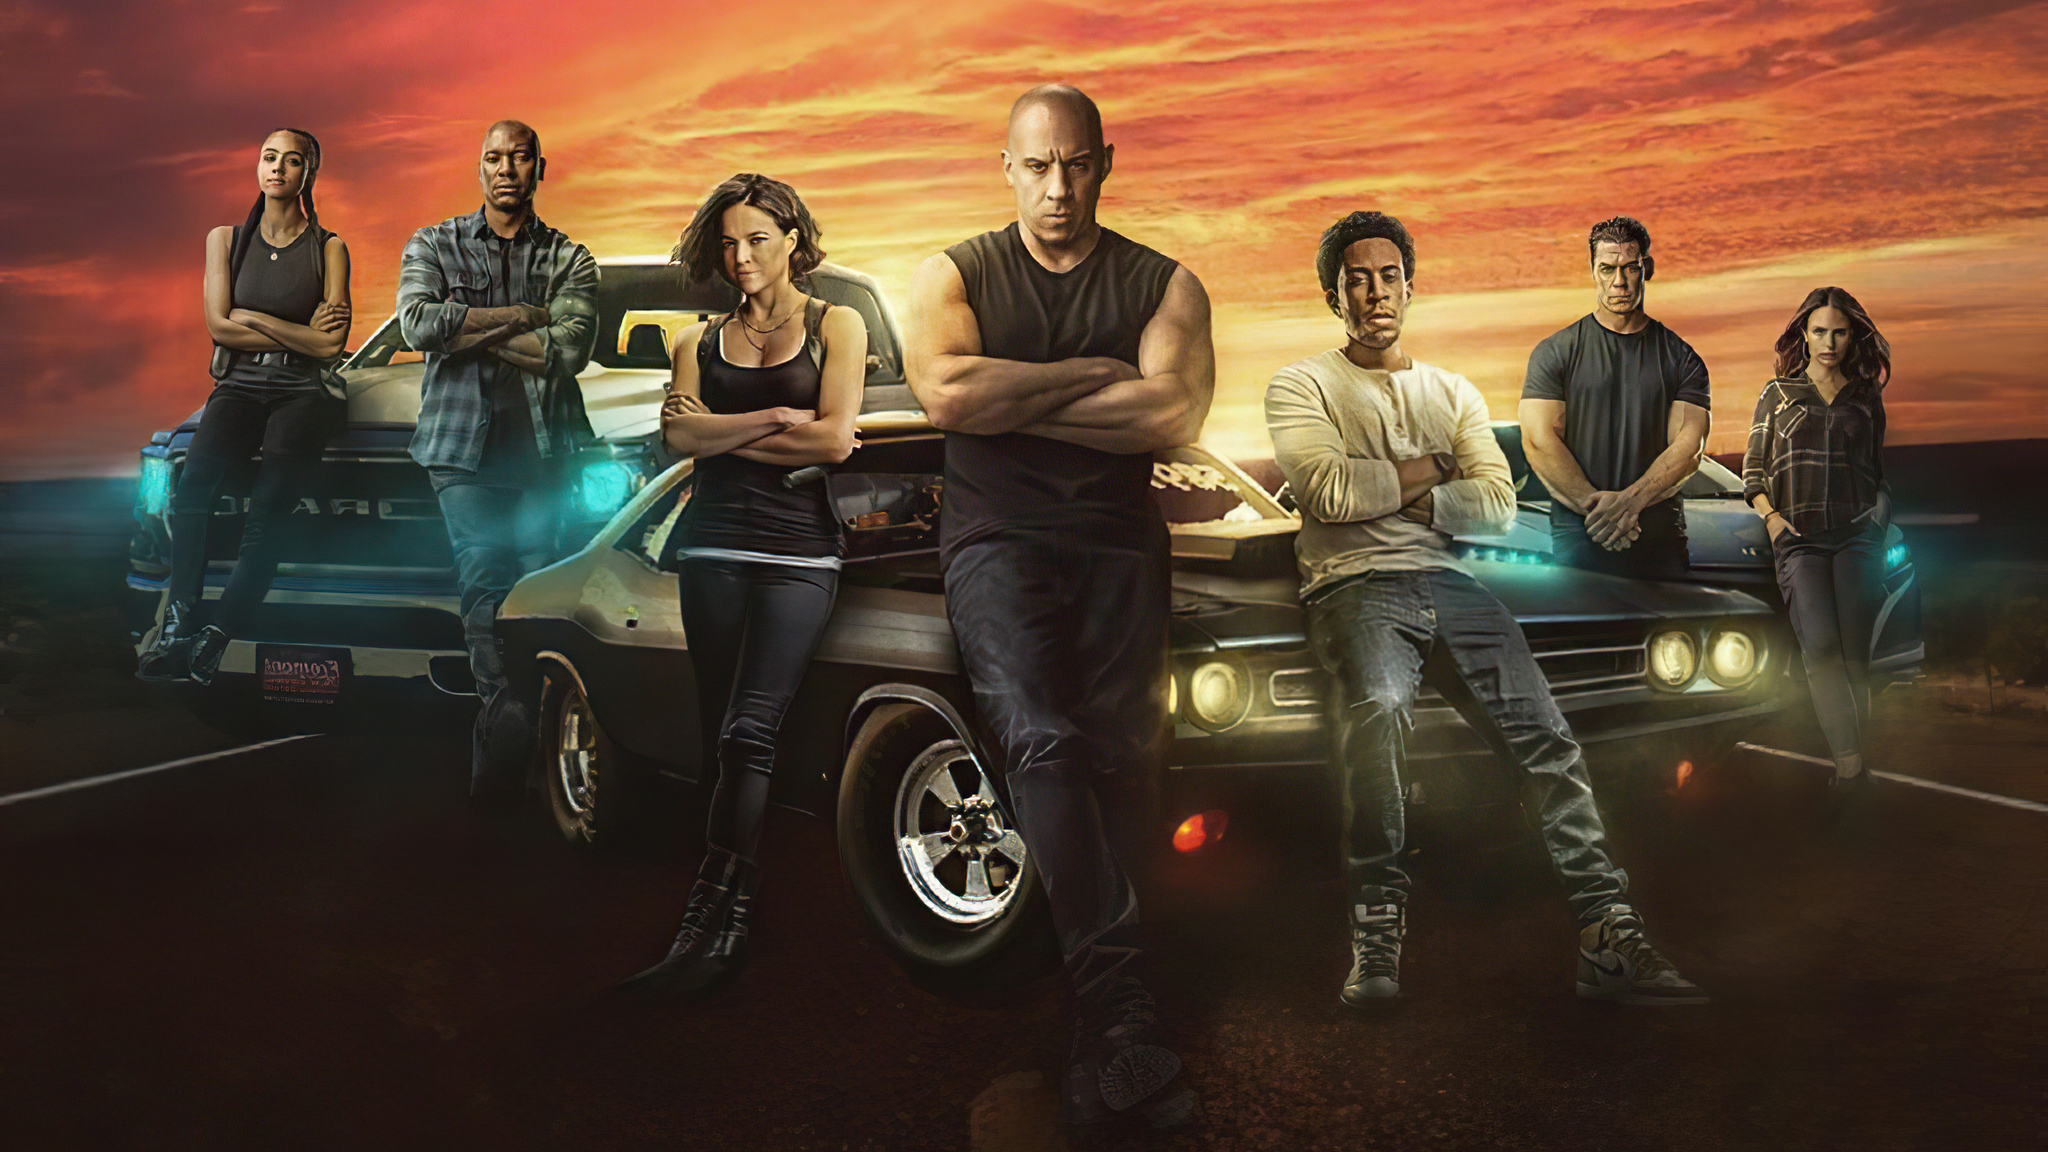 Fast And Furious 9 The Fast Saga 2020 In 2048x1152 Resolution. 